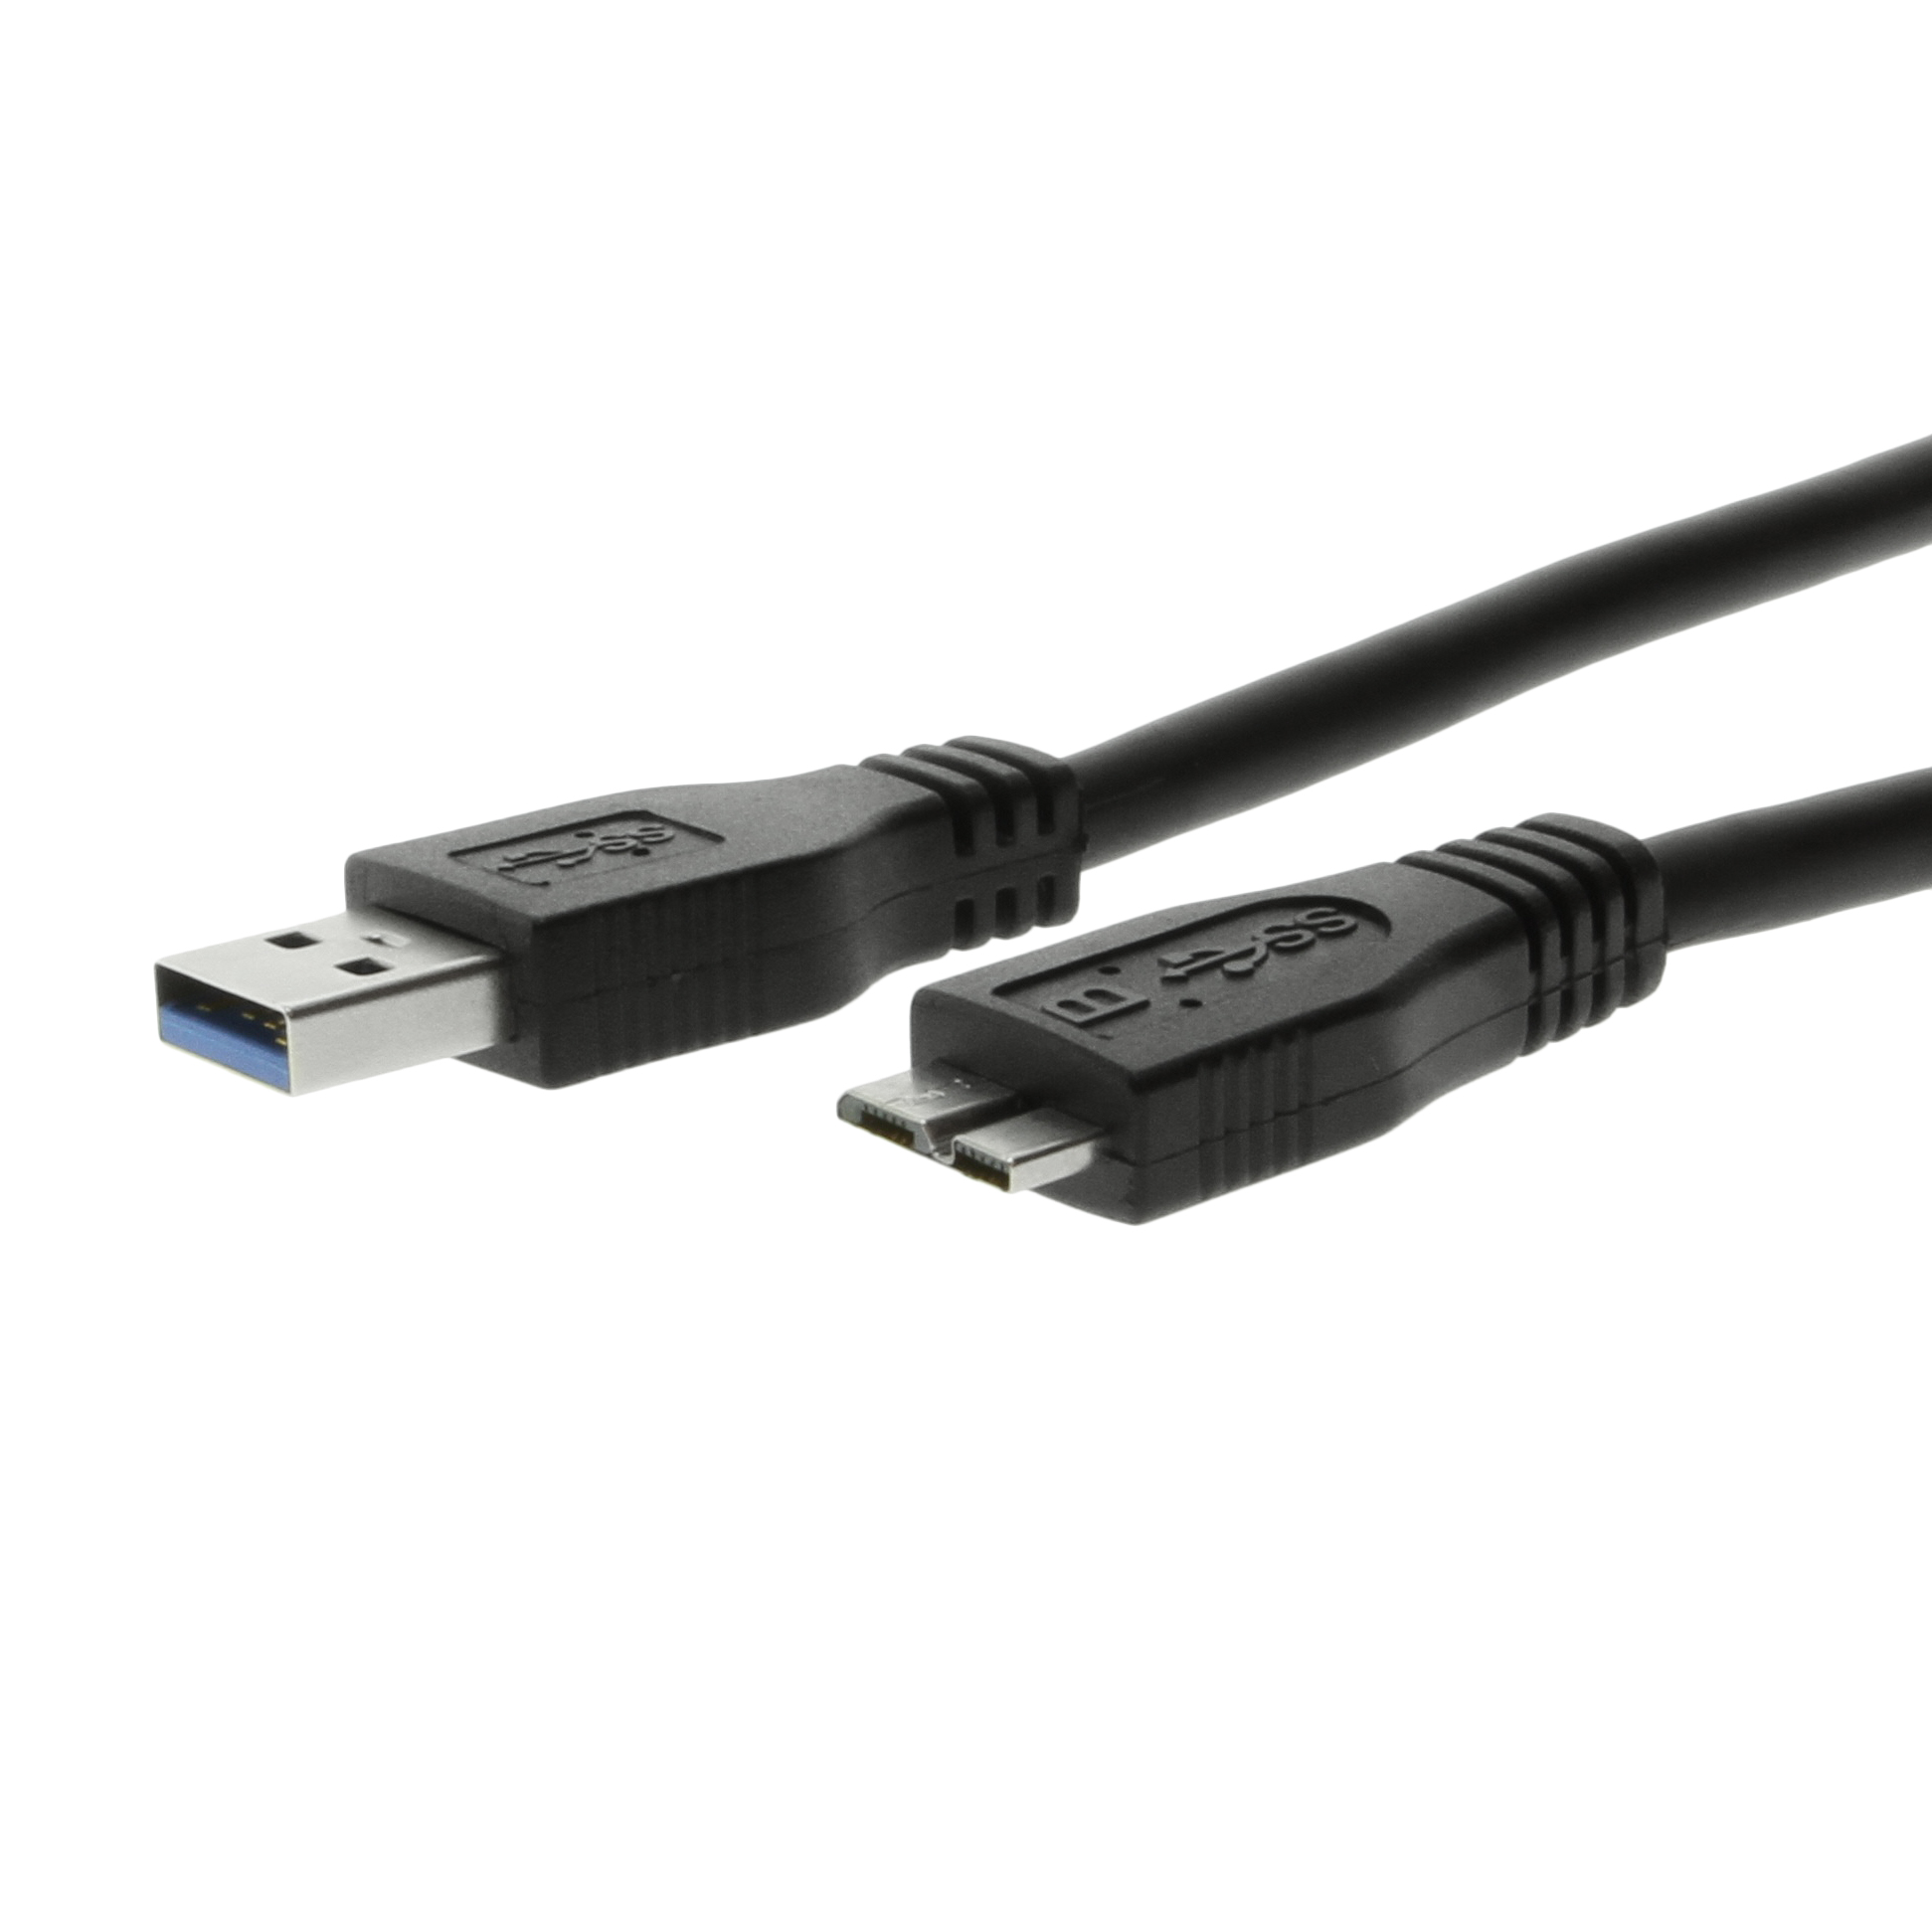 BEST Micro USB Cable 0.5 m OTG Cable - BEST 